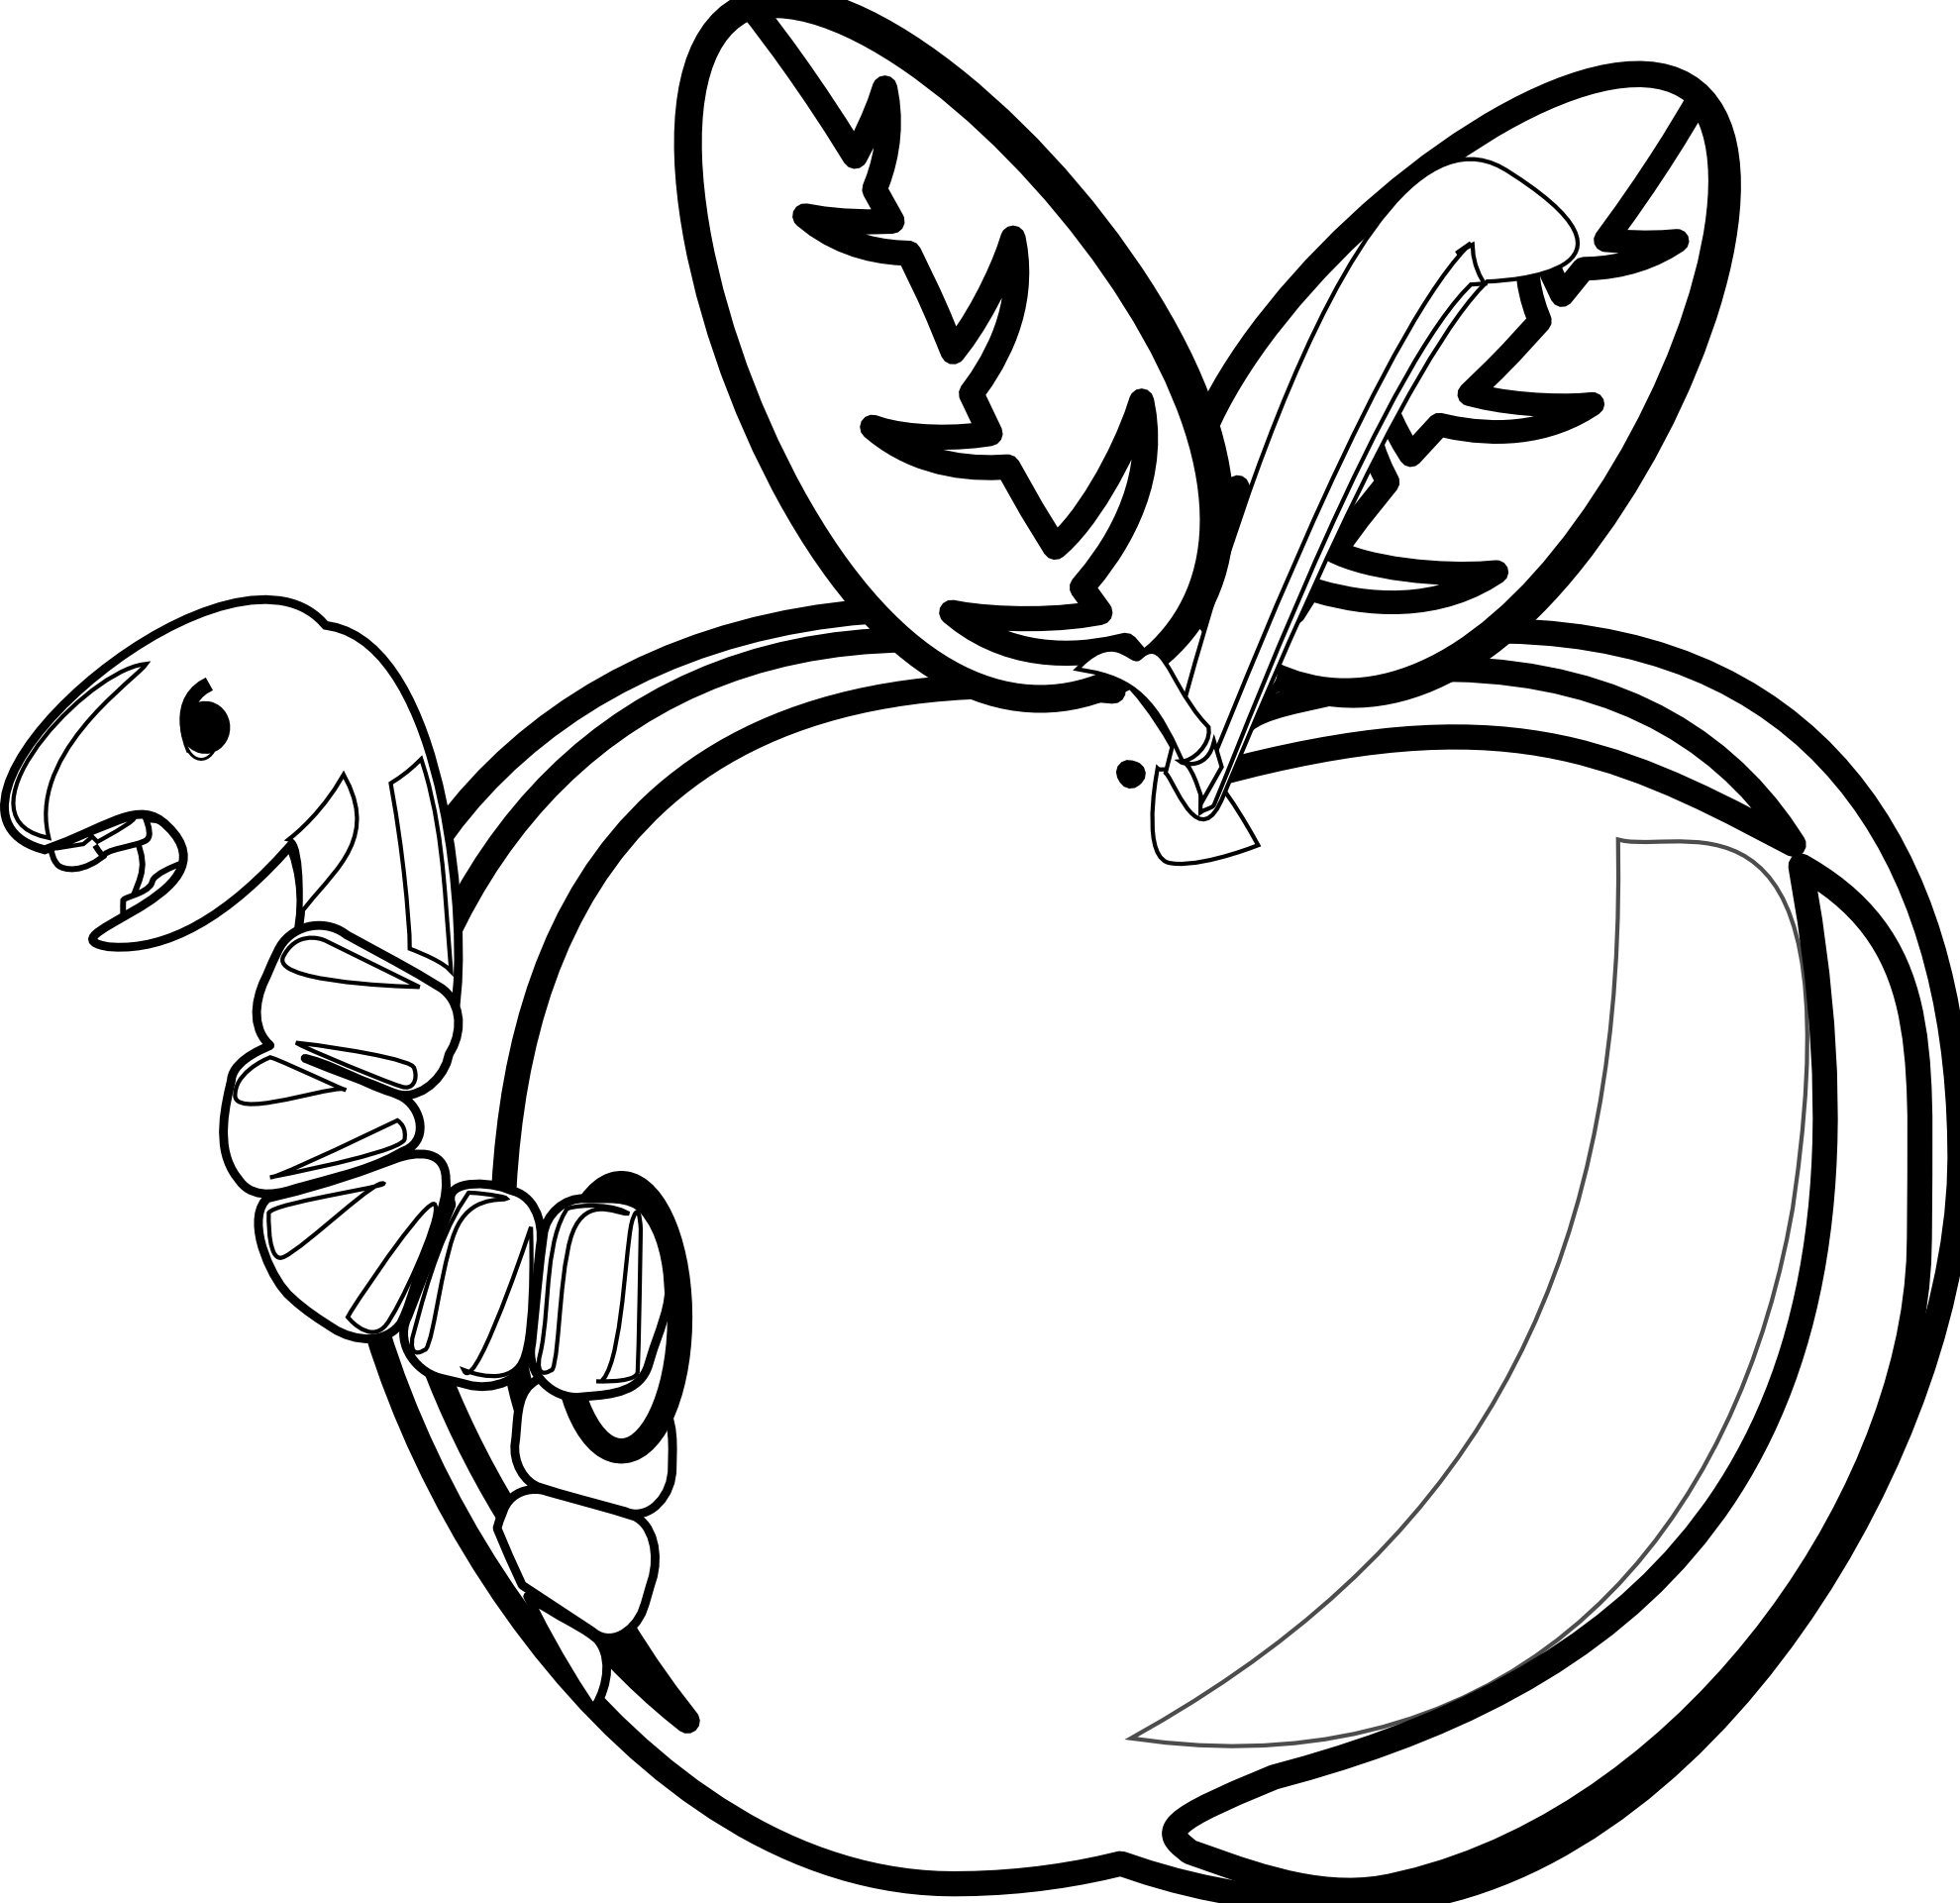 Free Apple Clipart Black And White Download Free Clip Art Free Clip Art On Clipart Library